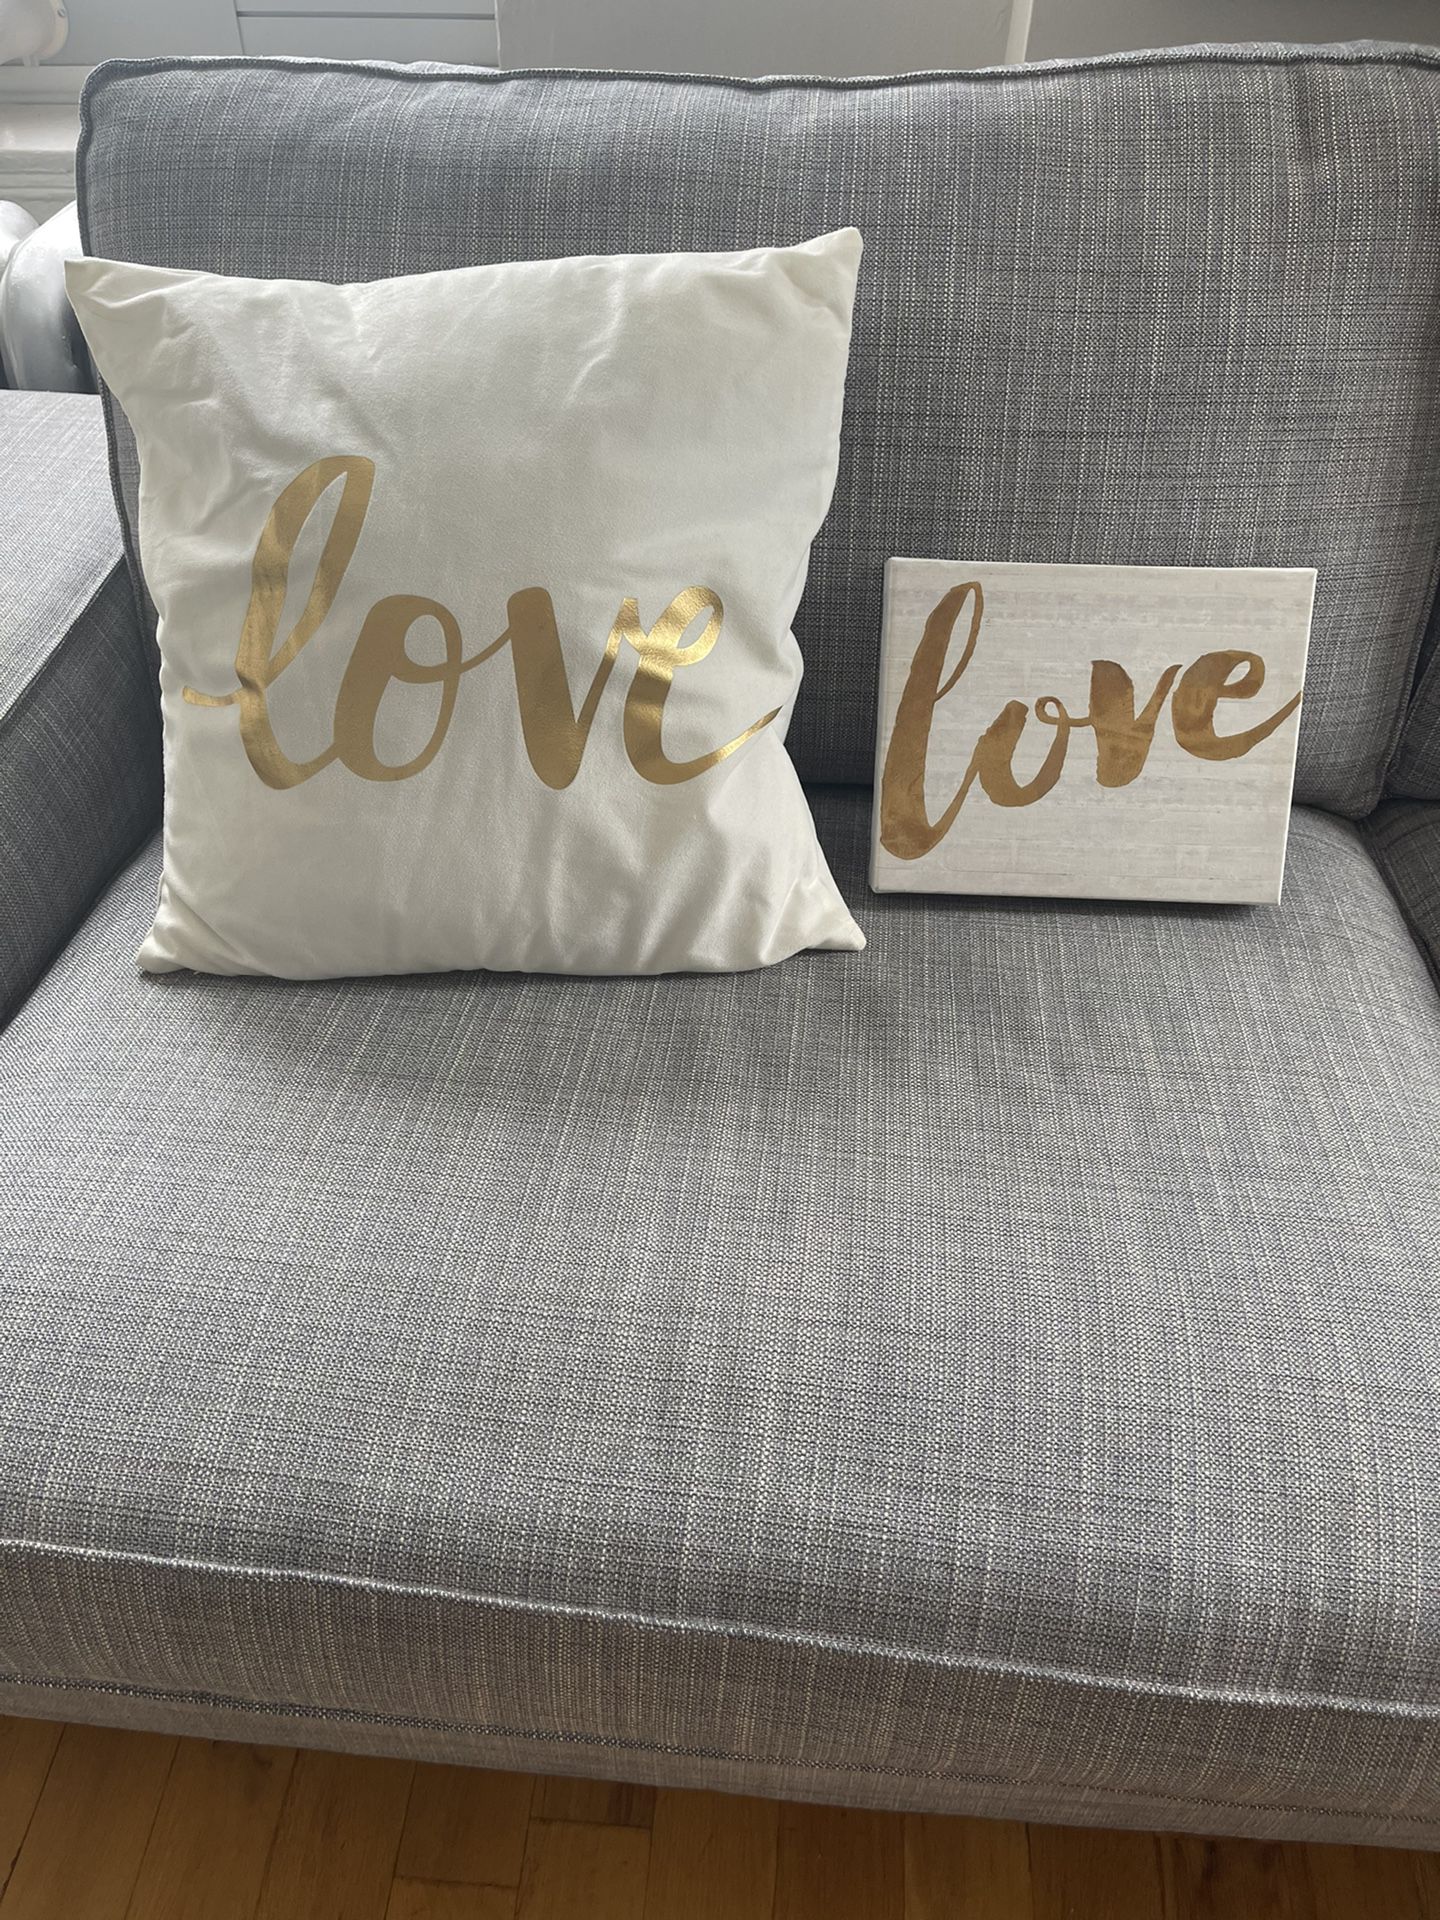 “Love” Decorative Pillow And Wall Hanging Decor Set